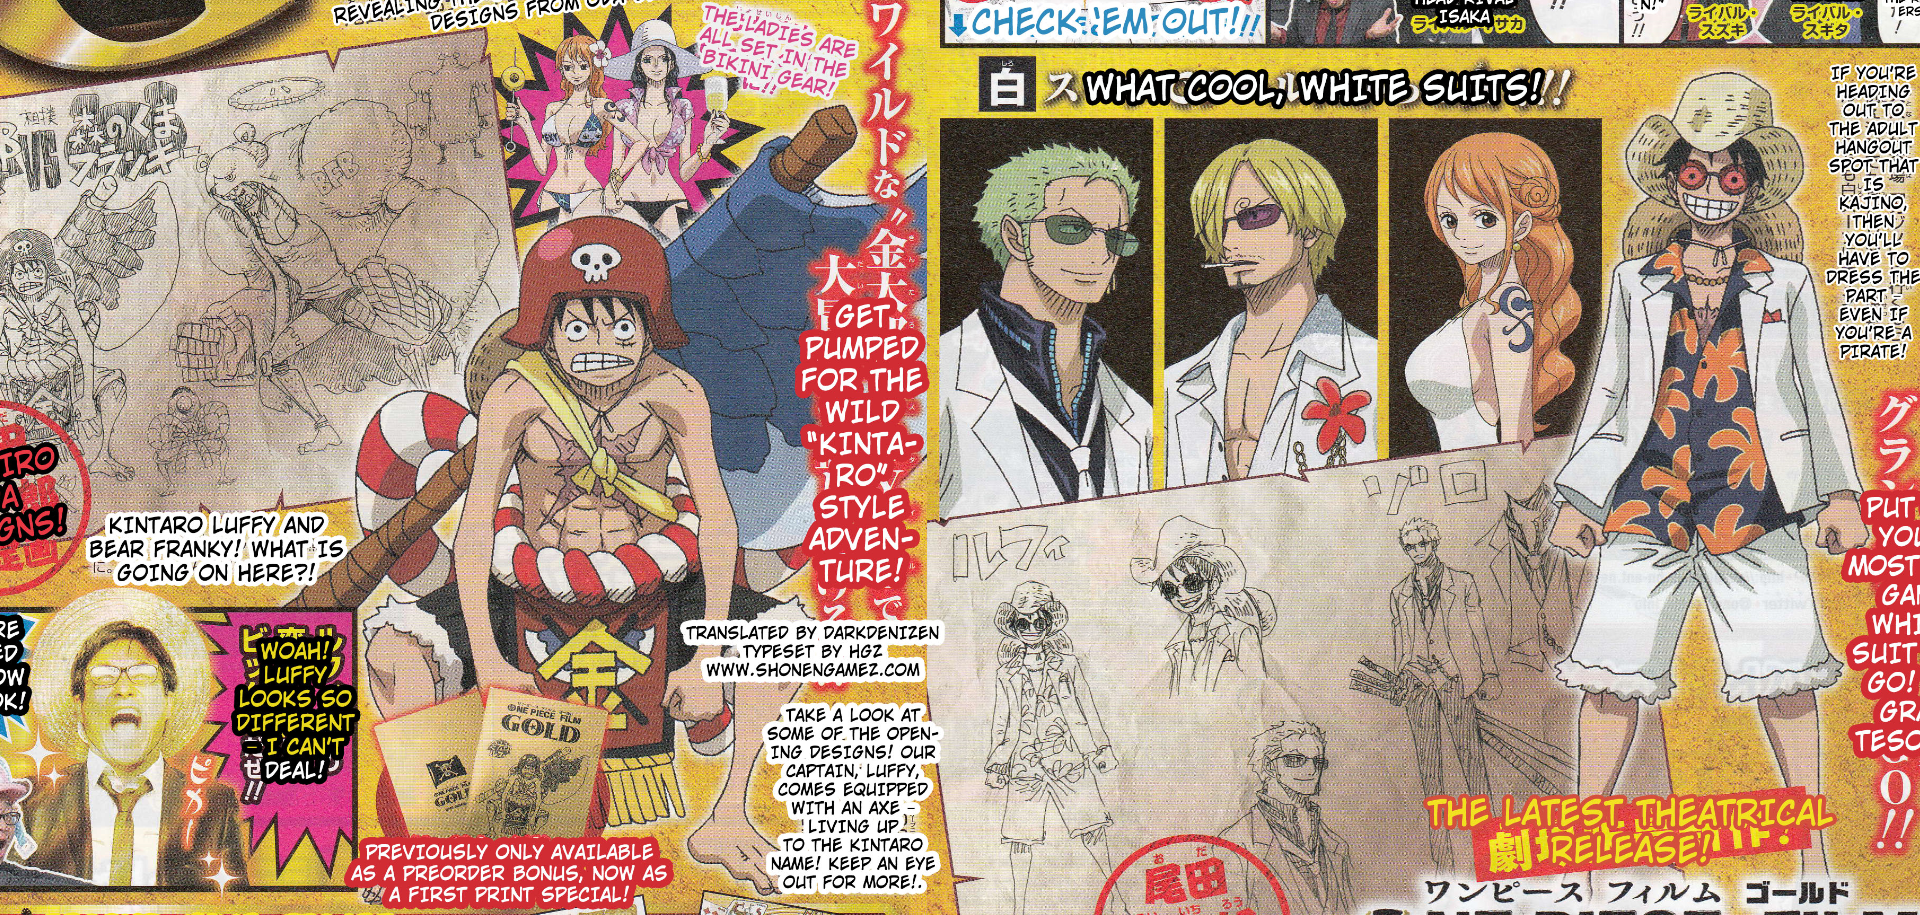 One Piece Film Gold colour manga released in 2 issues forming one cover  (Japan) : r/ImagesOfJapan